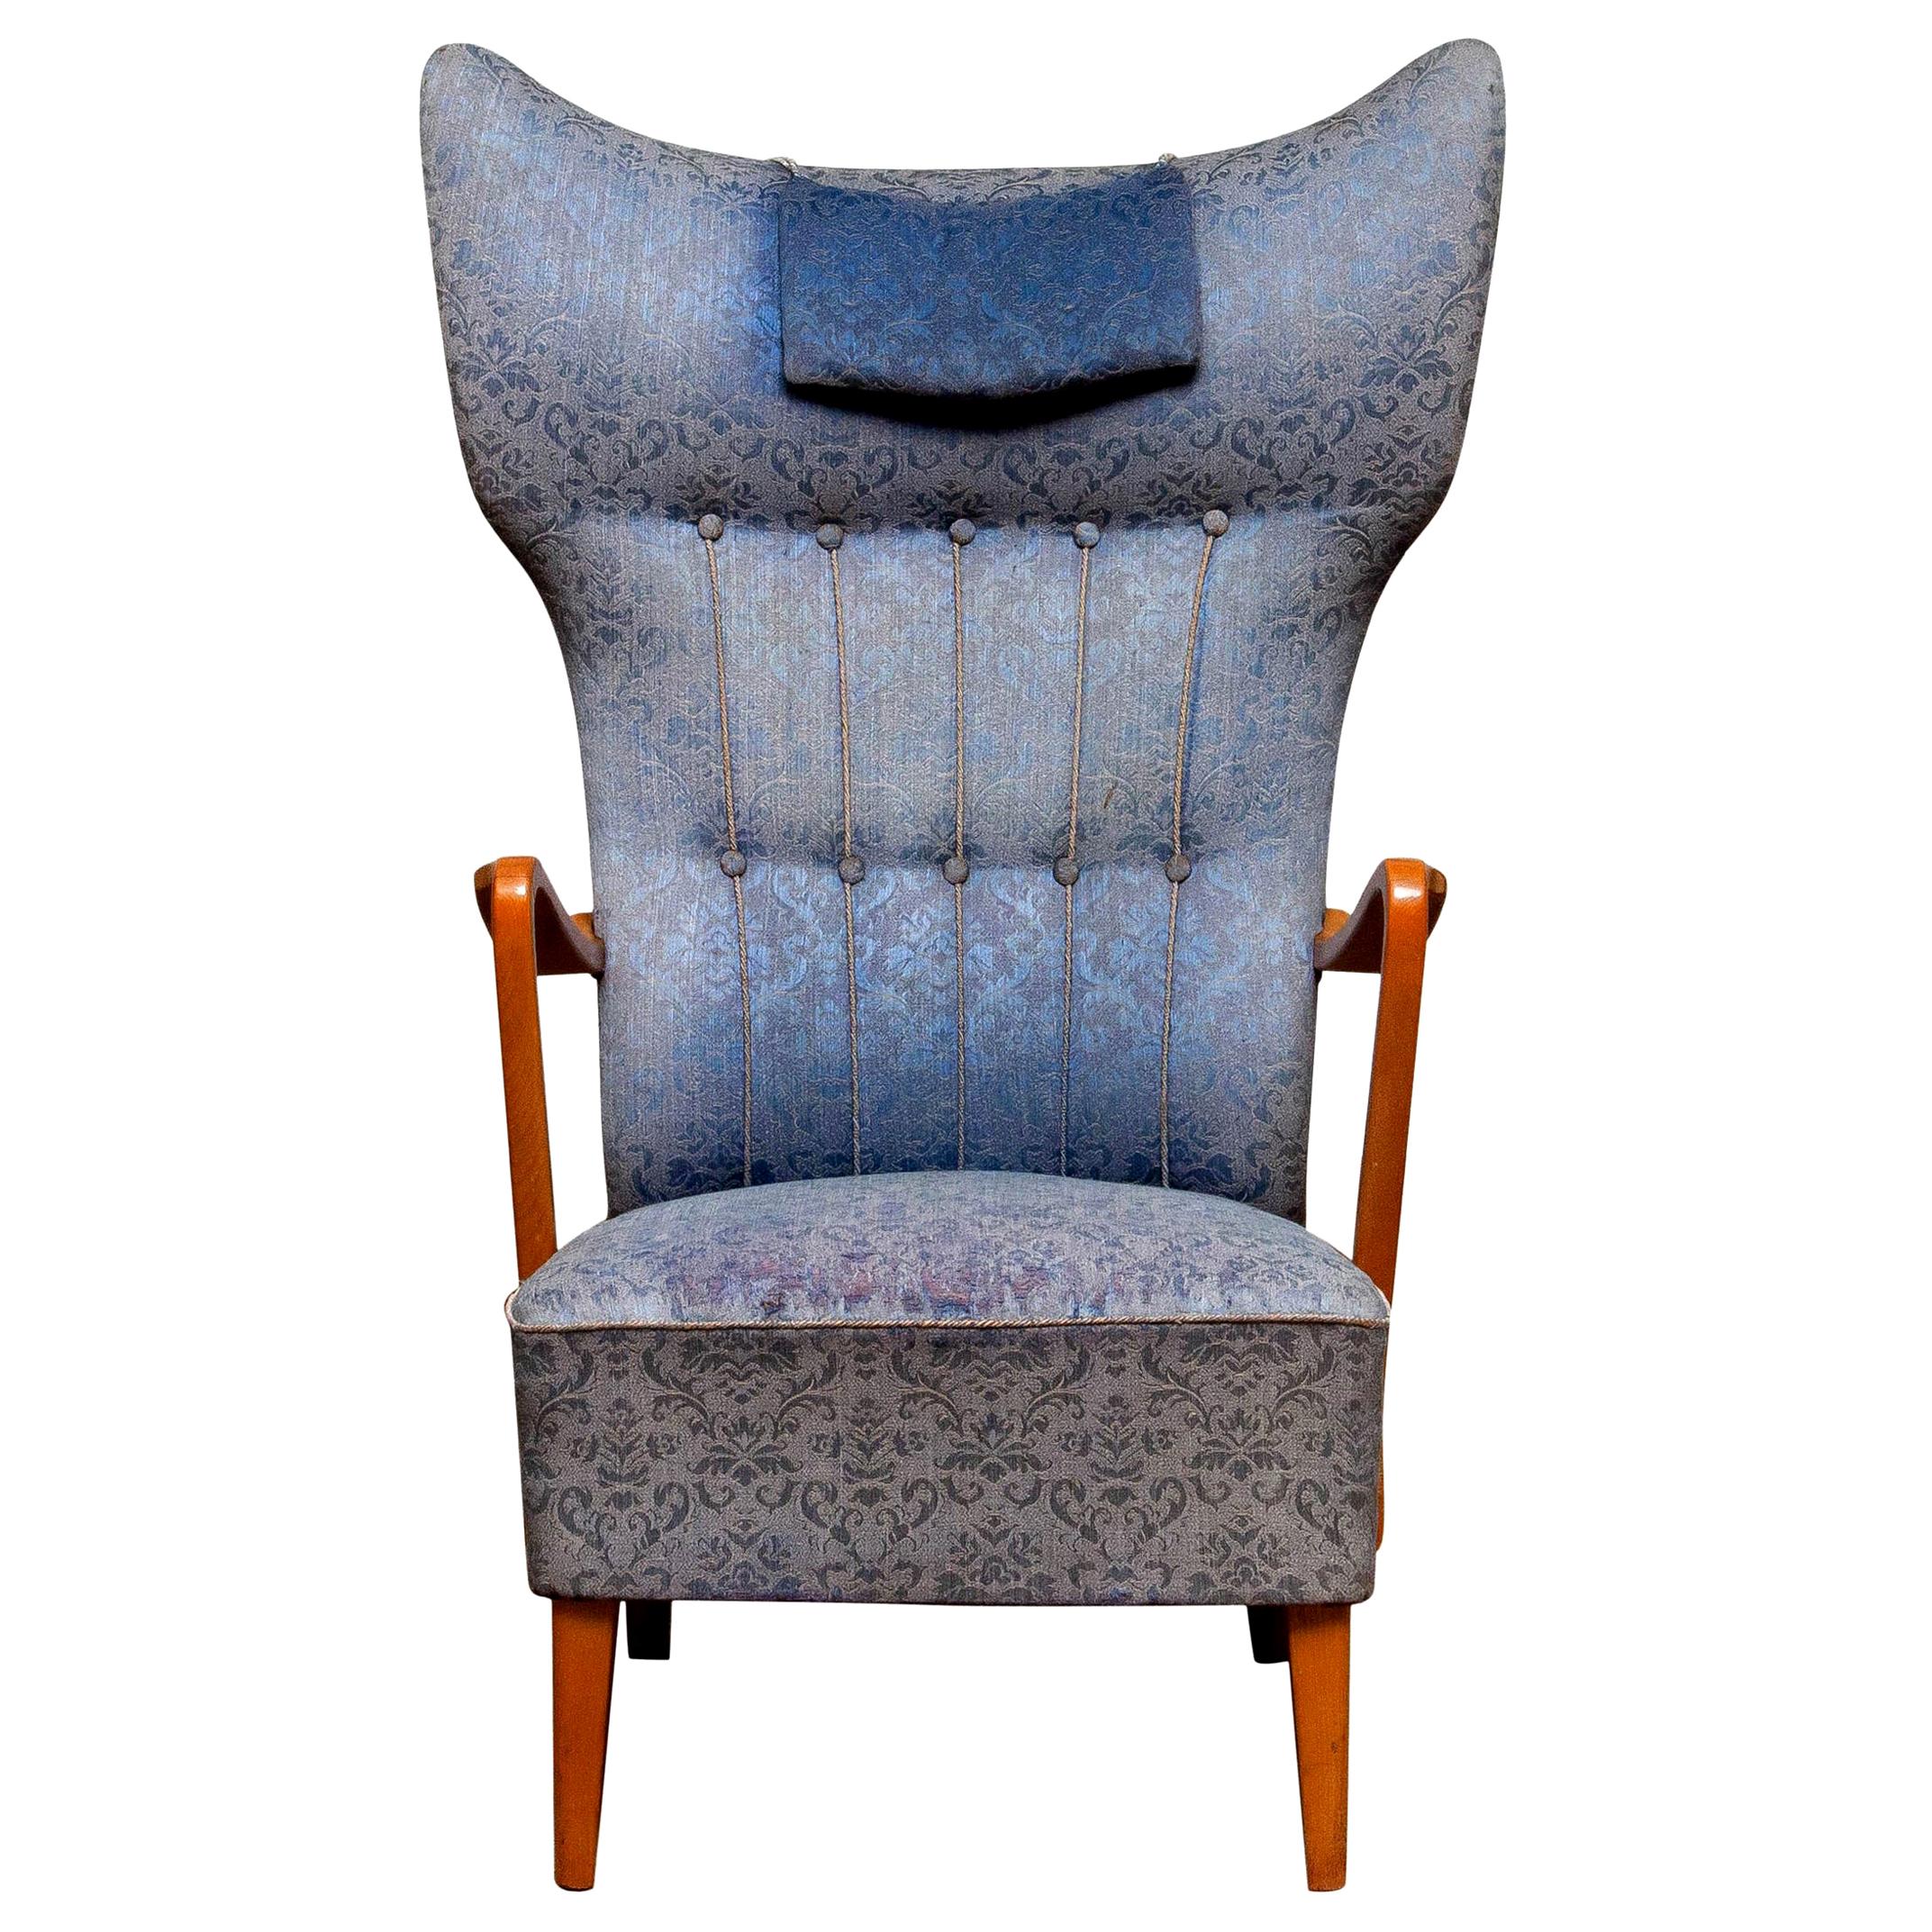 Beautiful extravagant and unique Art Nouveau wingback chair from the 1920s with extra high backrest. Made in Sweden.
The extremely slim and typical Art Nouveau armrests are made of oak in A-1 quality even as the legs.
Springs and bindings are in